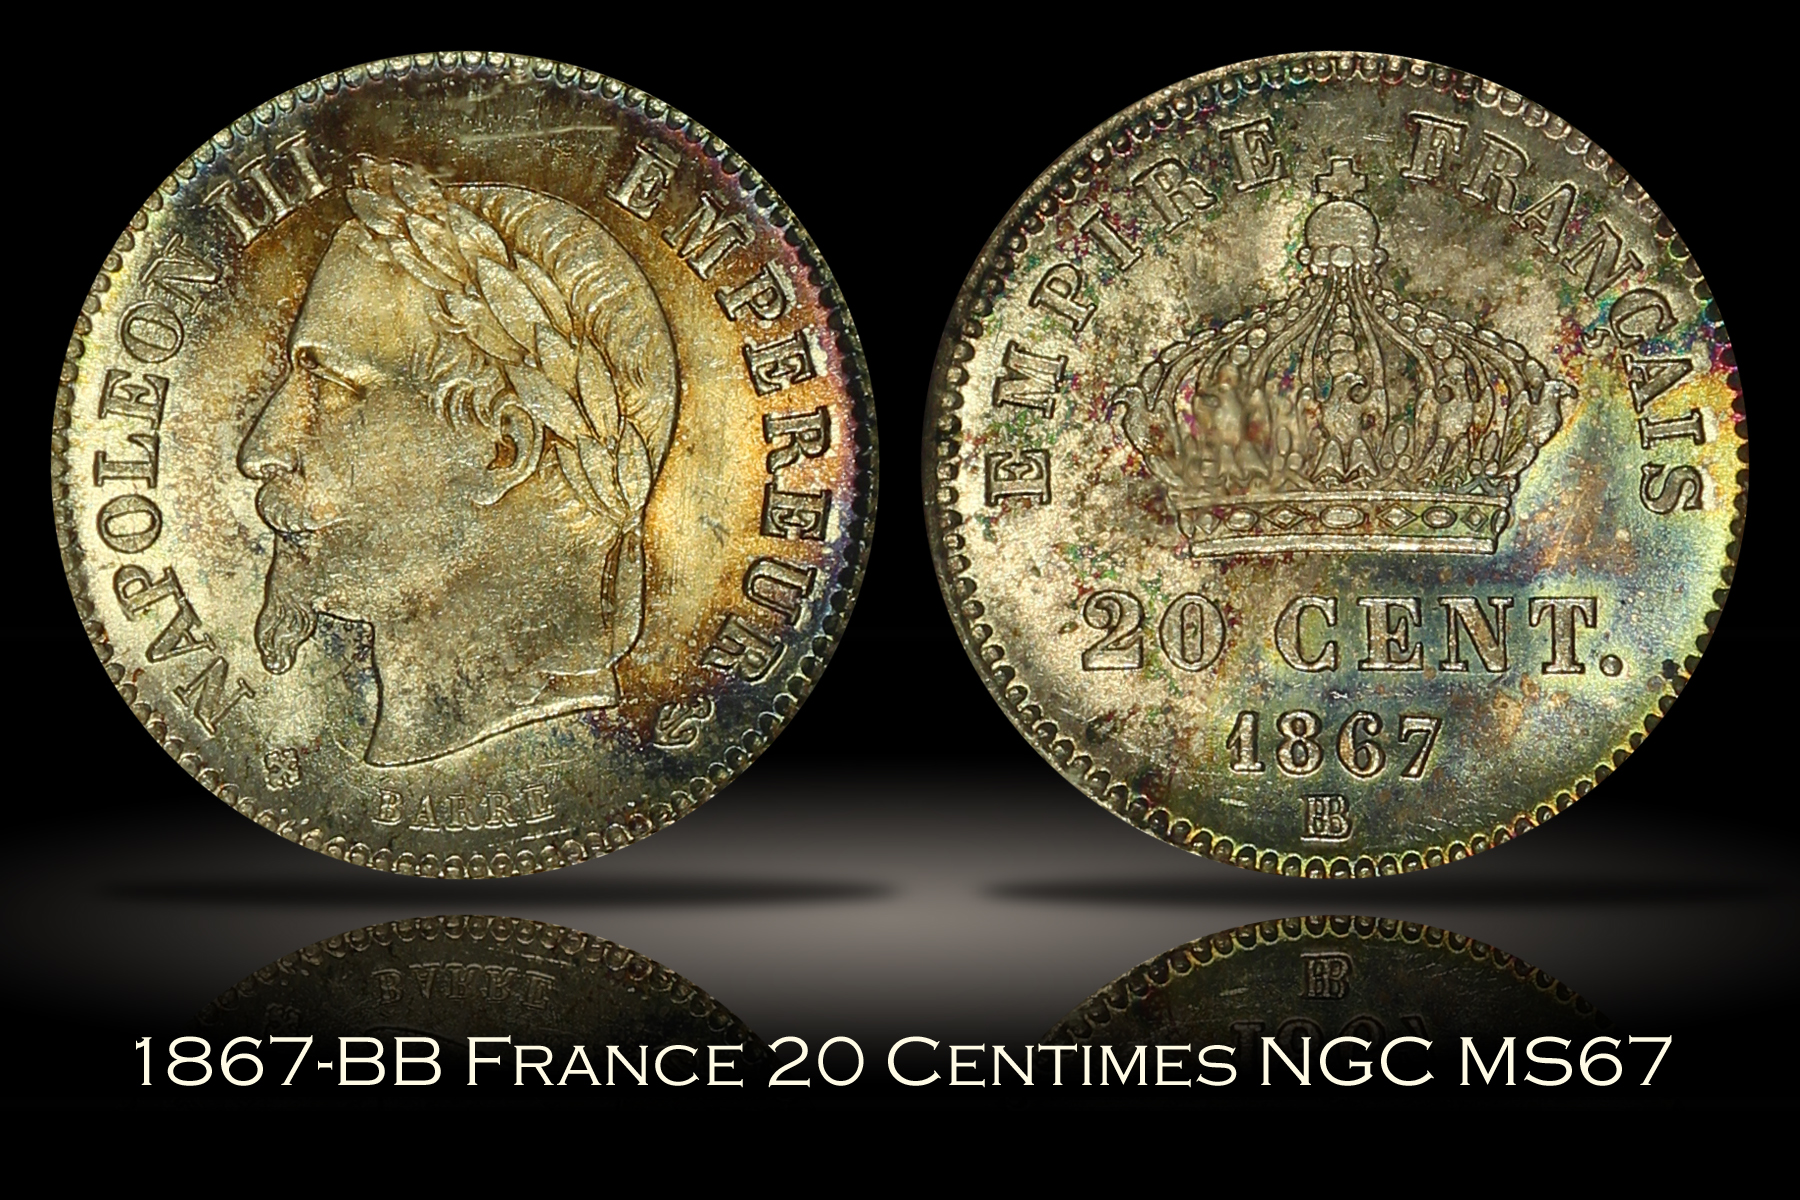 1867-BB France 20 Centimes NGC MS67